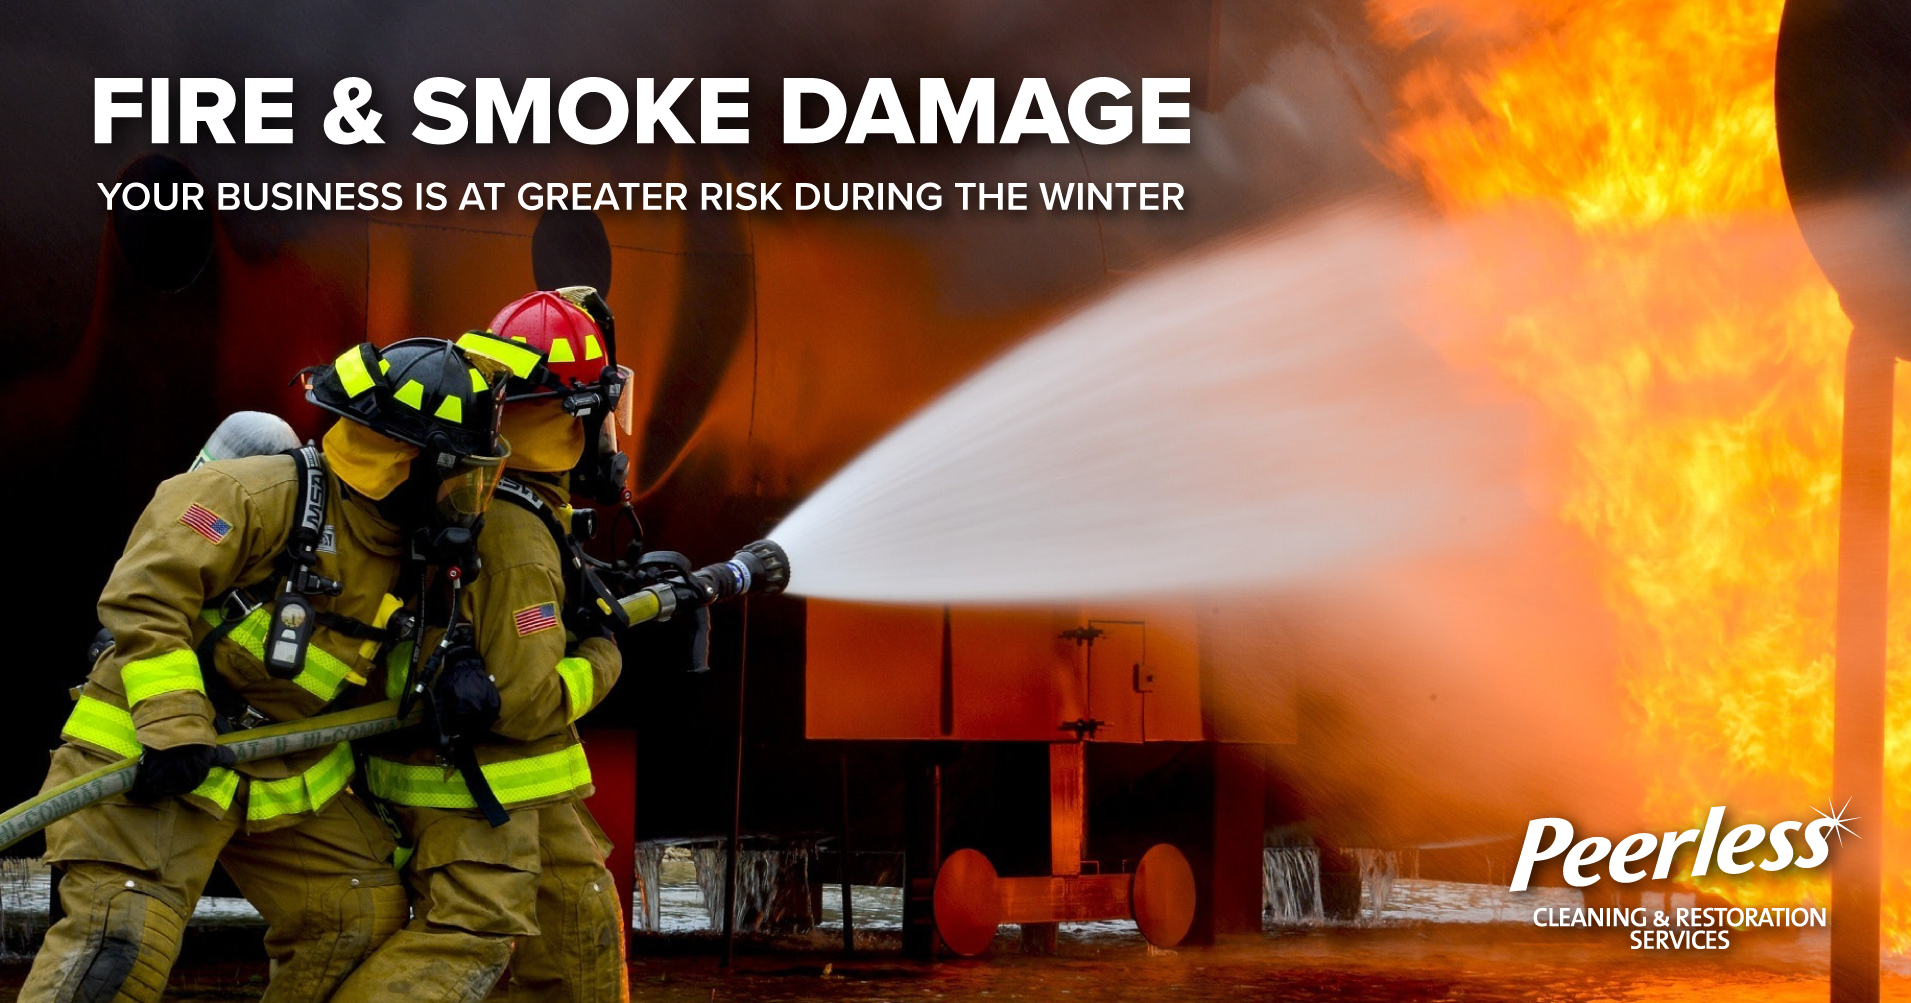 Peerless Commercial Fire and Smoke Damage Restoration